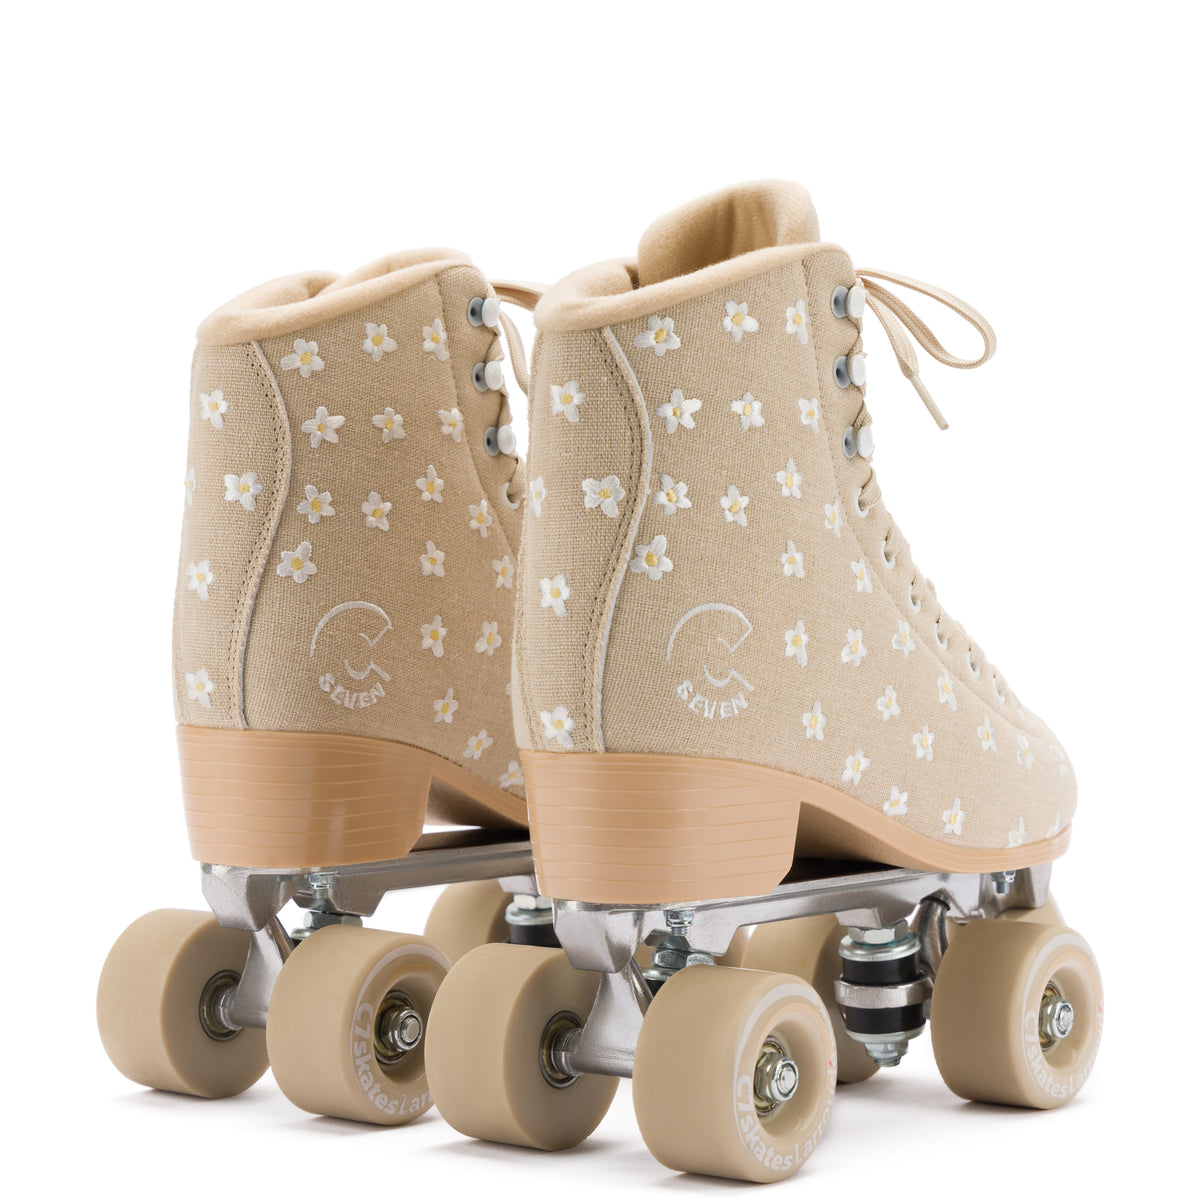 Larroudé x C7 Skates In Raffia Fabric and Flower Embroidery